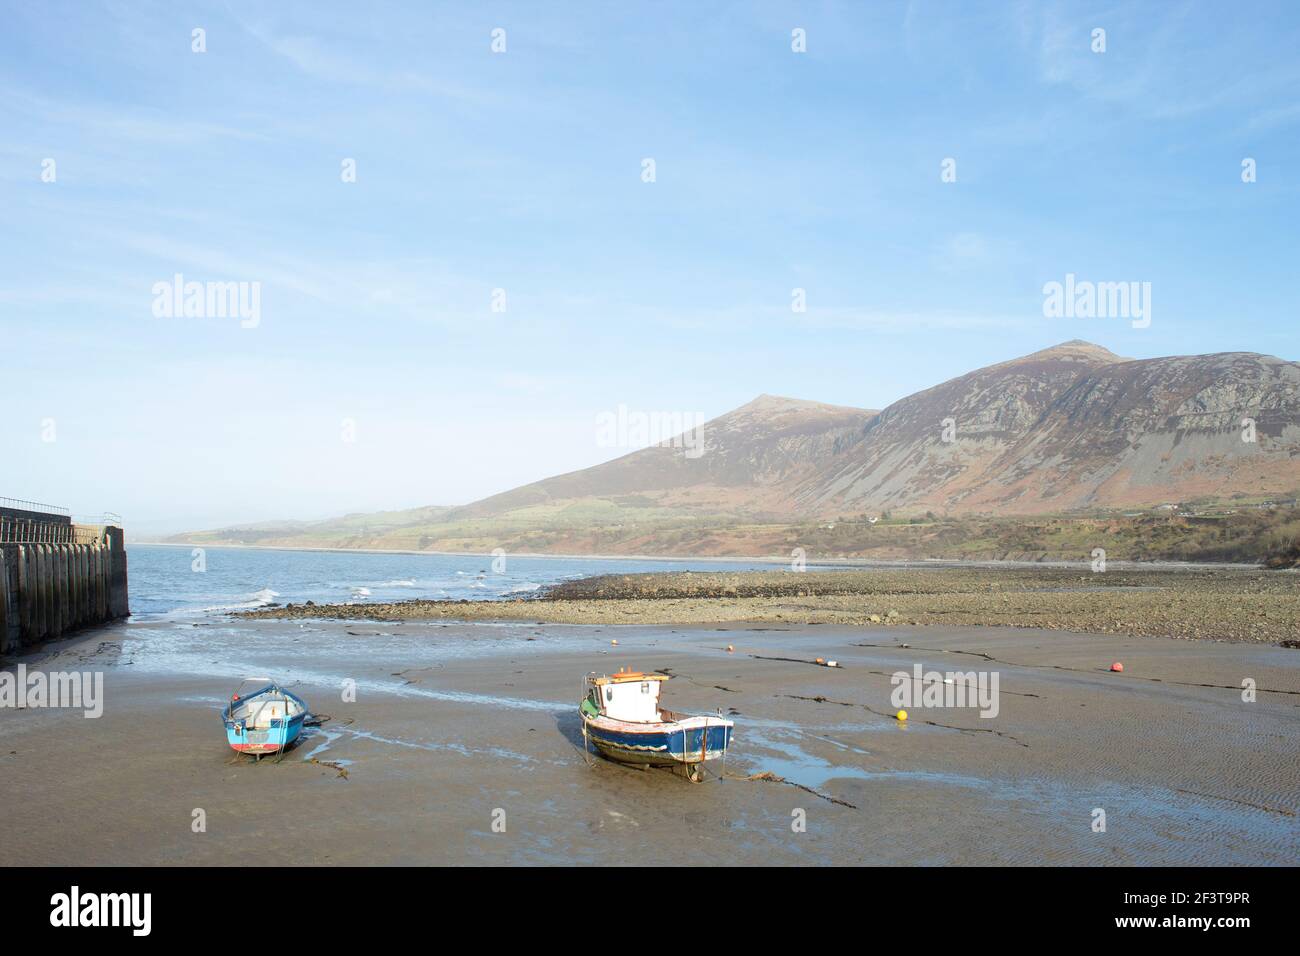 Trefor beach, Wales. Two small fishing boats at a secluded bay near Snowdonia on the Llyn Peninsula on a sunny, bright spring day. Peaceful placid cou Stock Photo